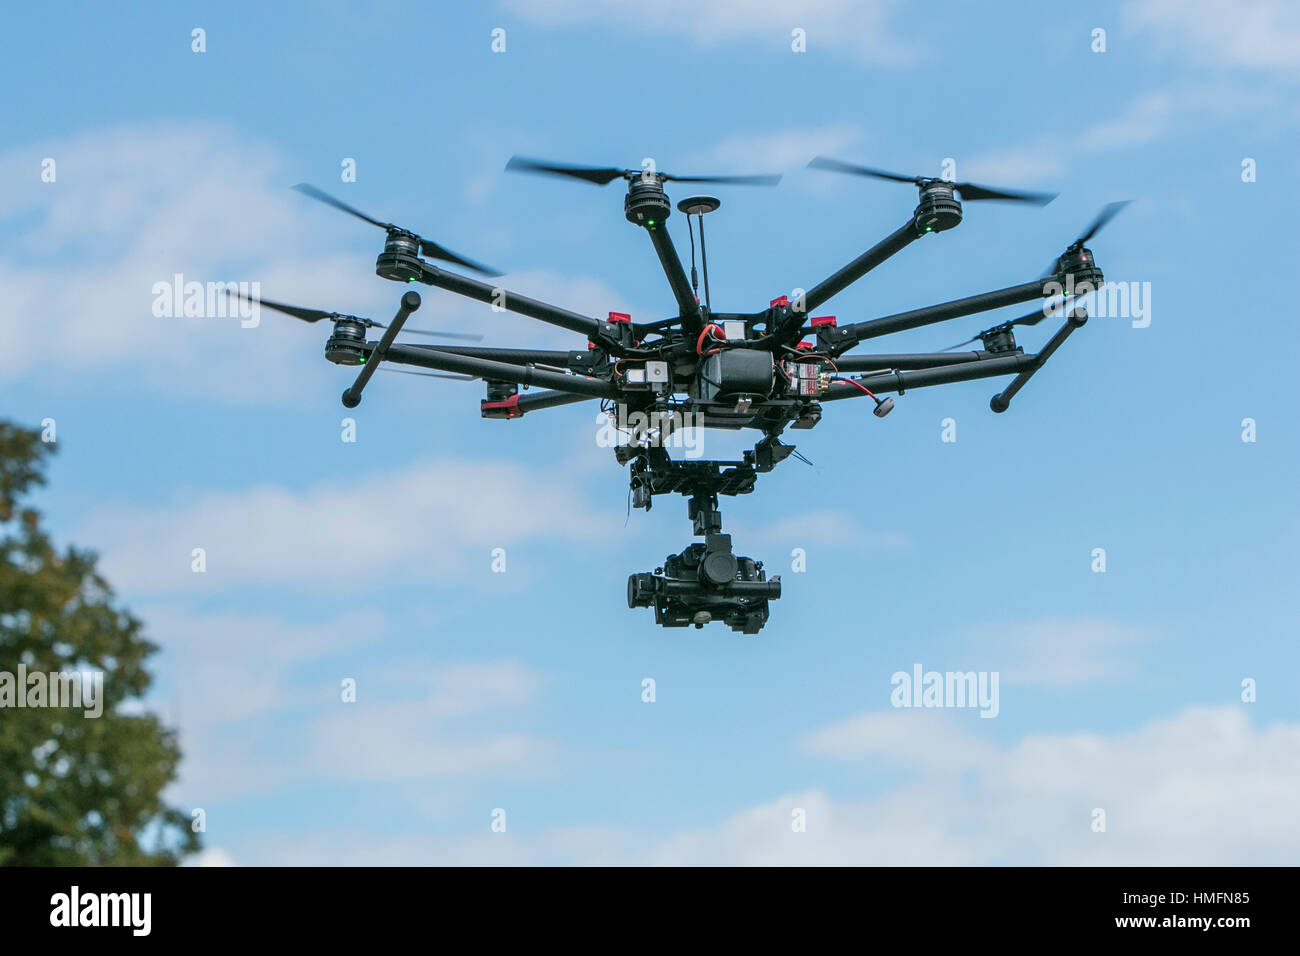 A camera drone in flight against a blue sky Stock Photo